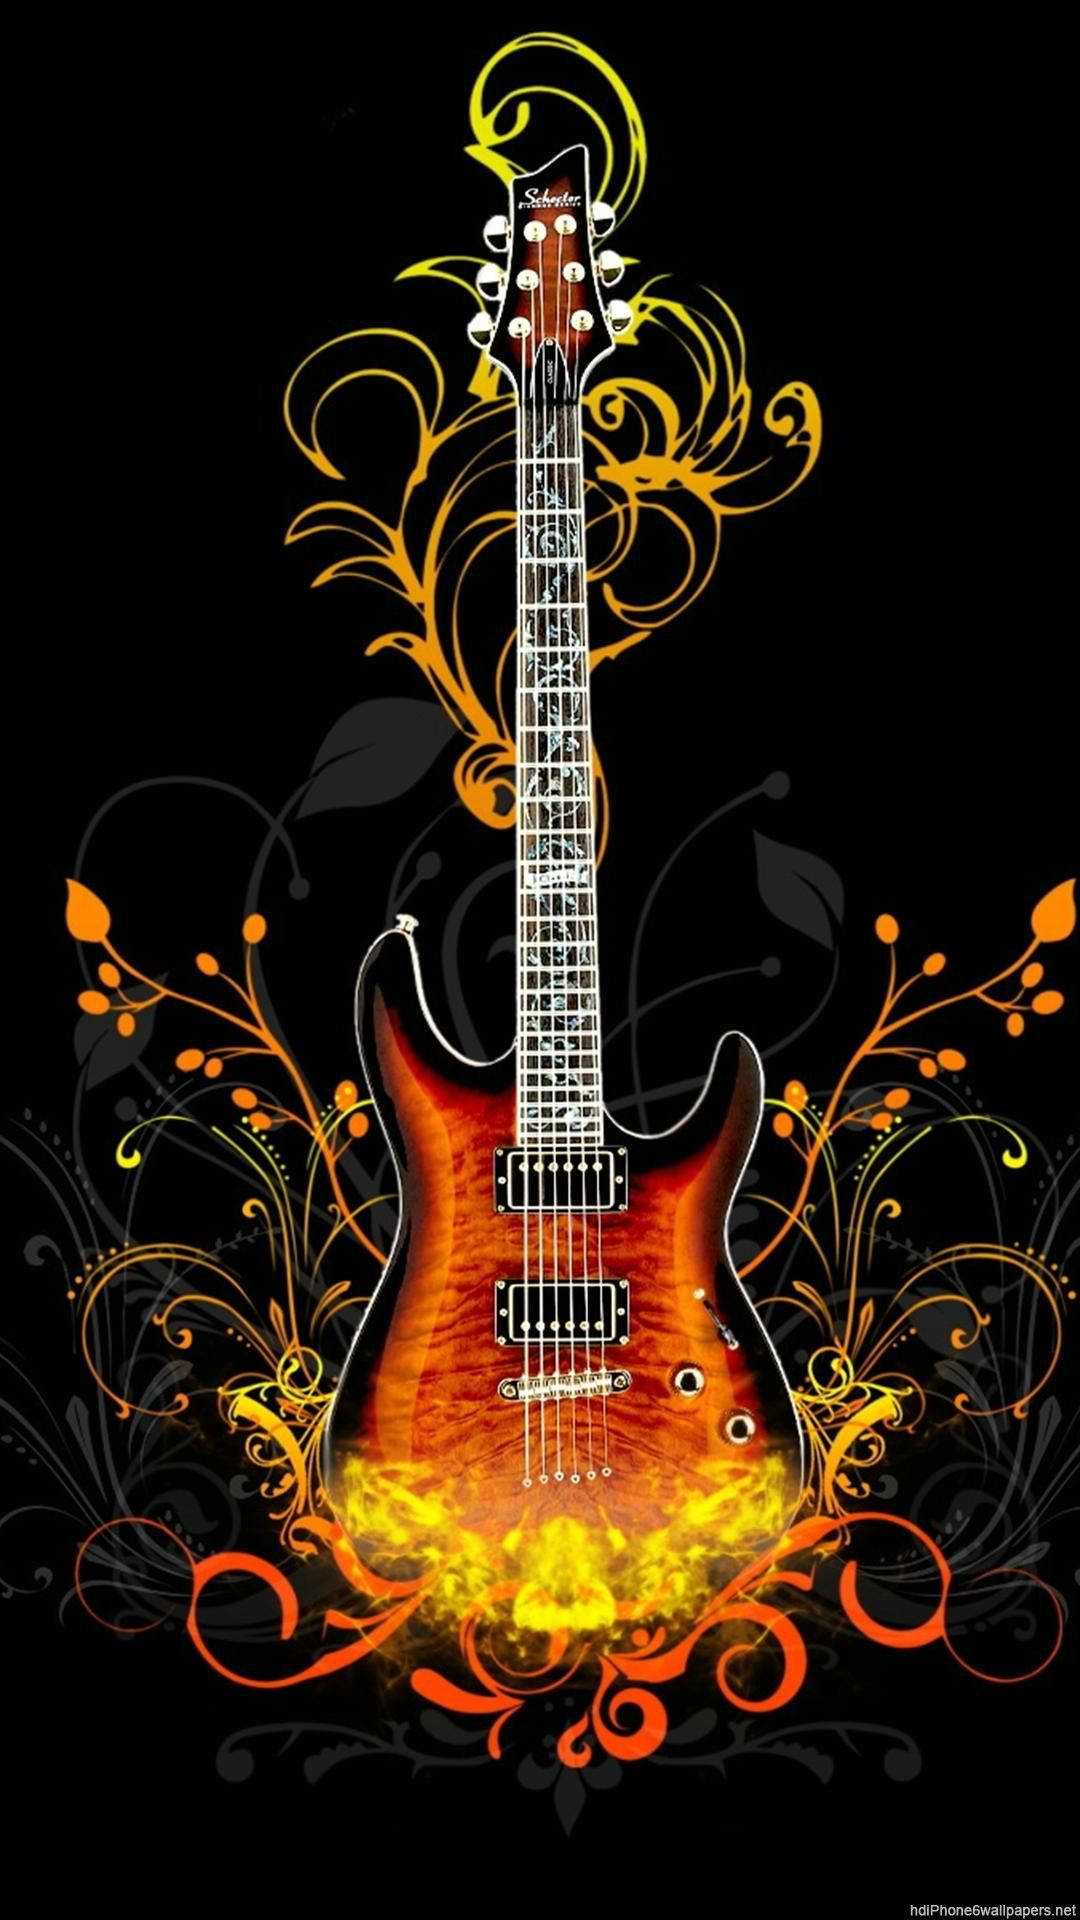 Stunning 3D Guitar with Floral Patterns Wallpaper